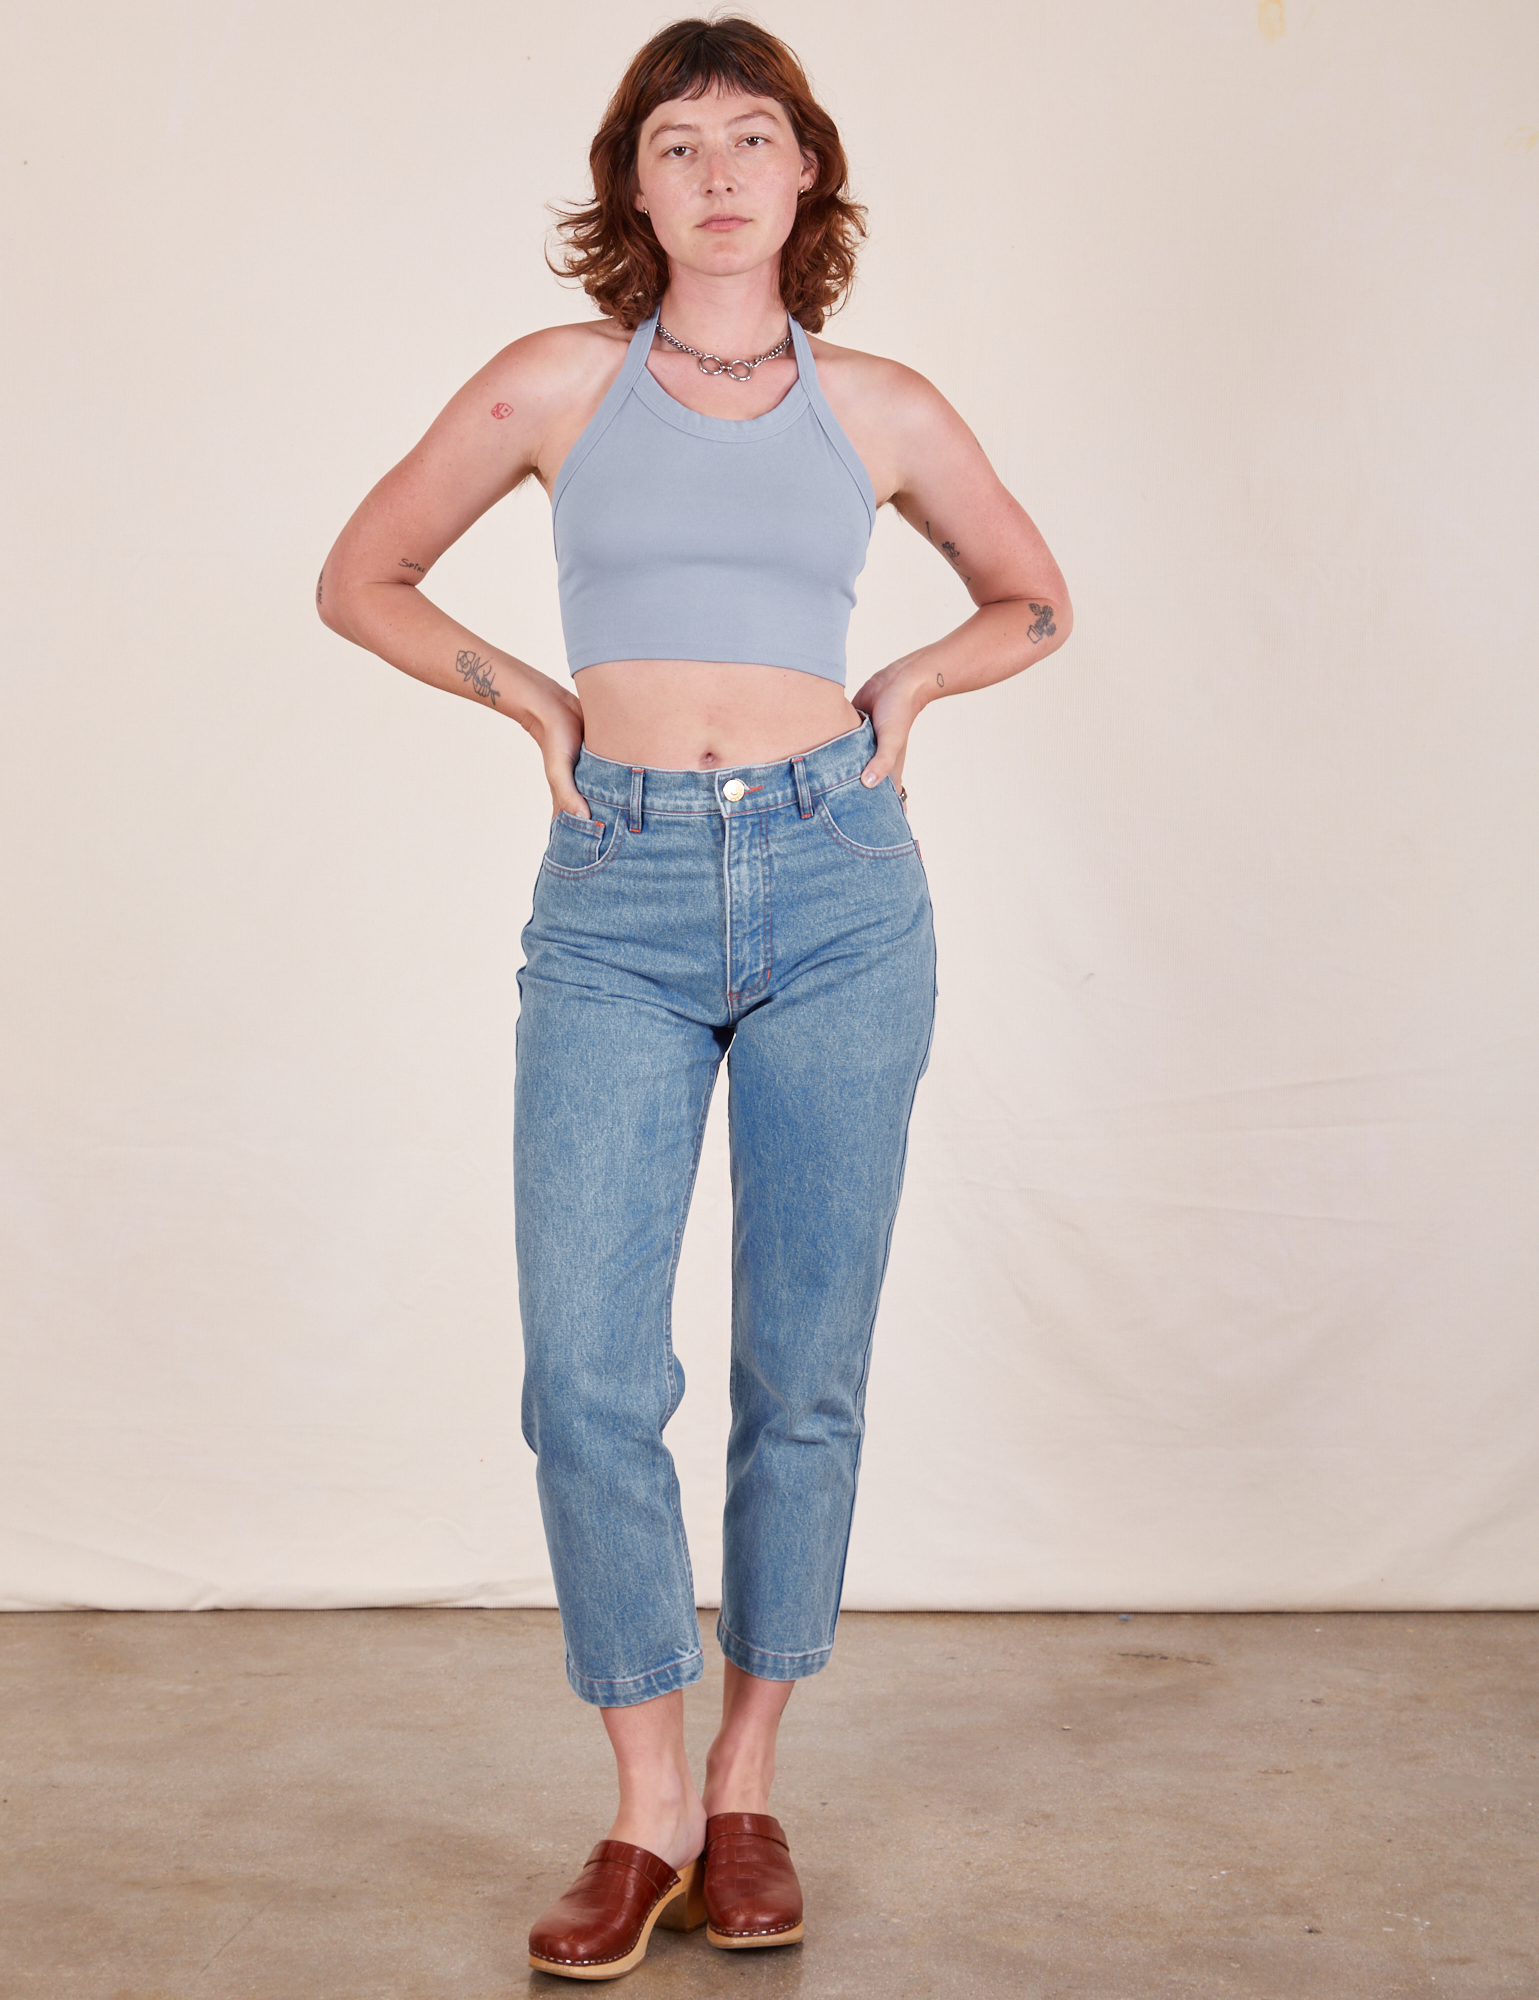 Alex is wearing Halter Top in Periwinkle and light wash Frontier Jeans